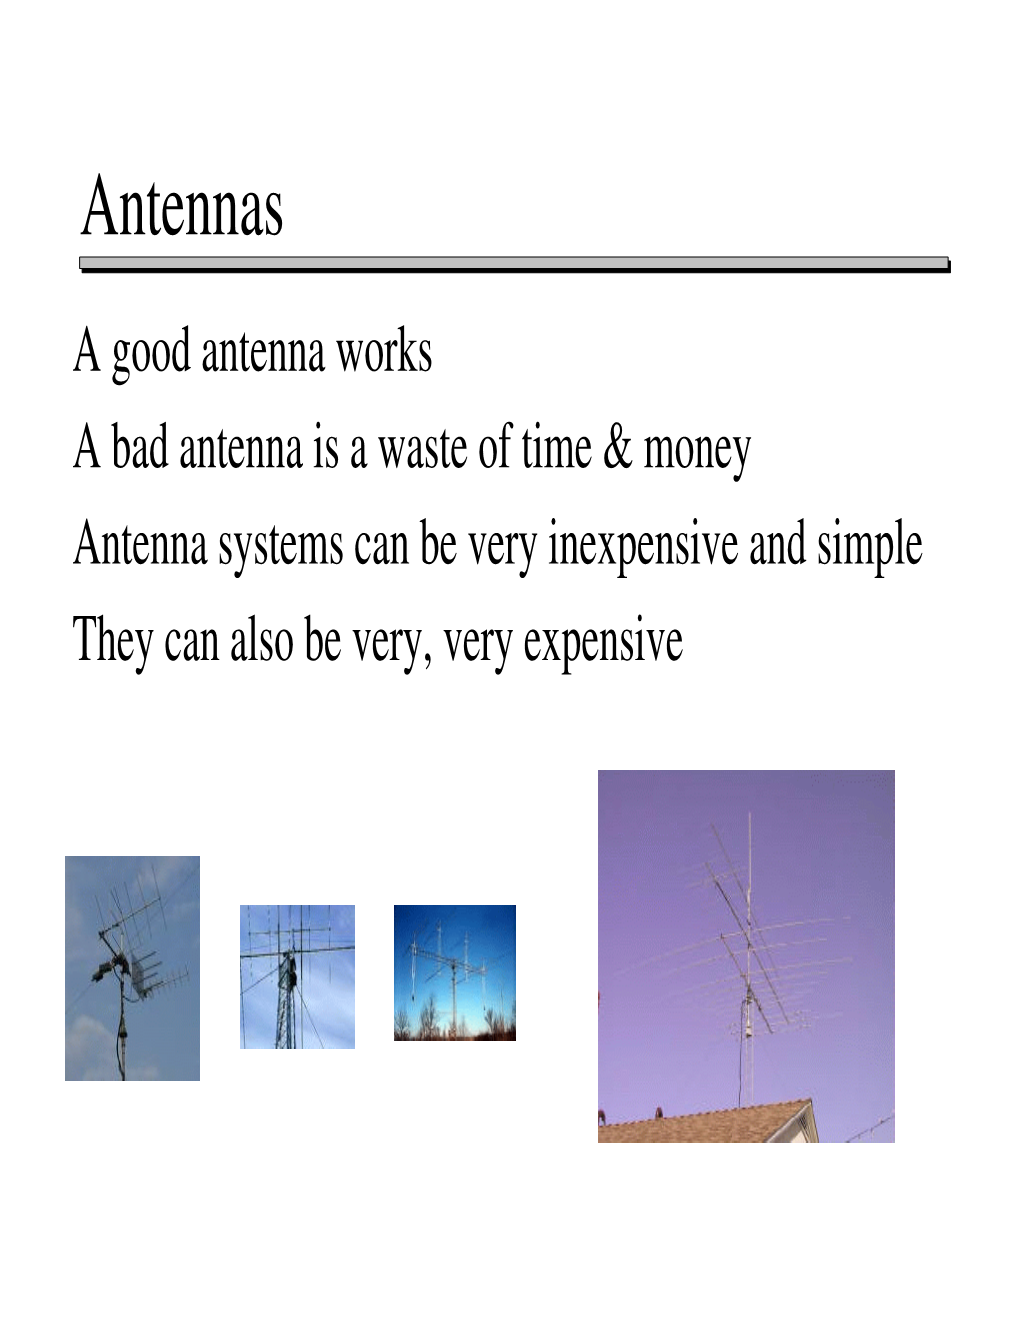 Antennas a Good Antenna Works a Bad Antenna Is a Waste of Time & Money Antenna Systems Can Be Very Inexpensive and Simple They Can Also Be Very, Very Expensive